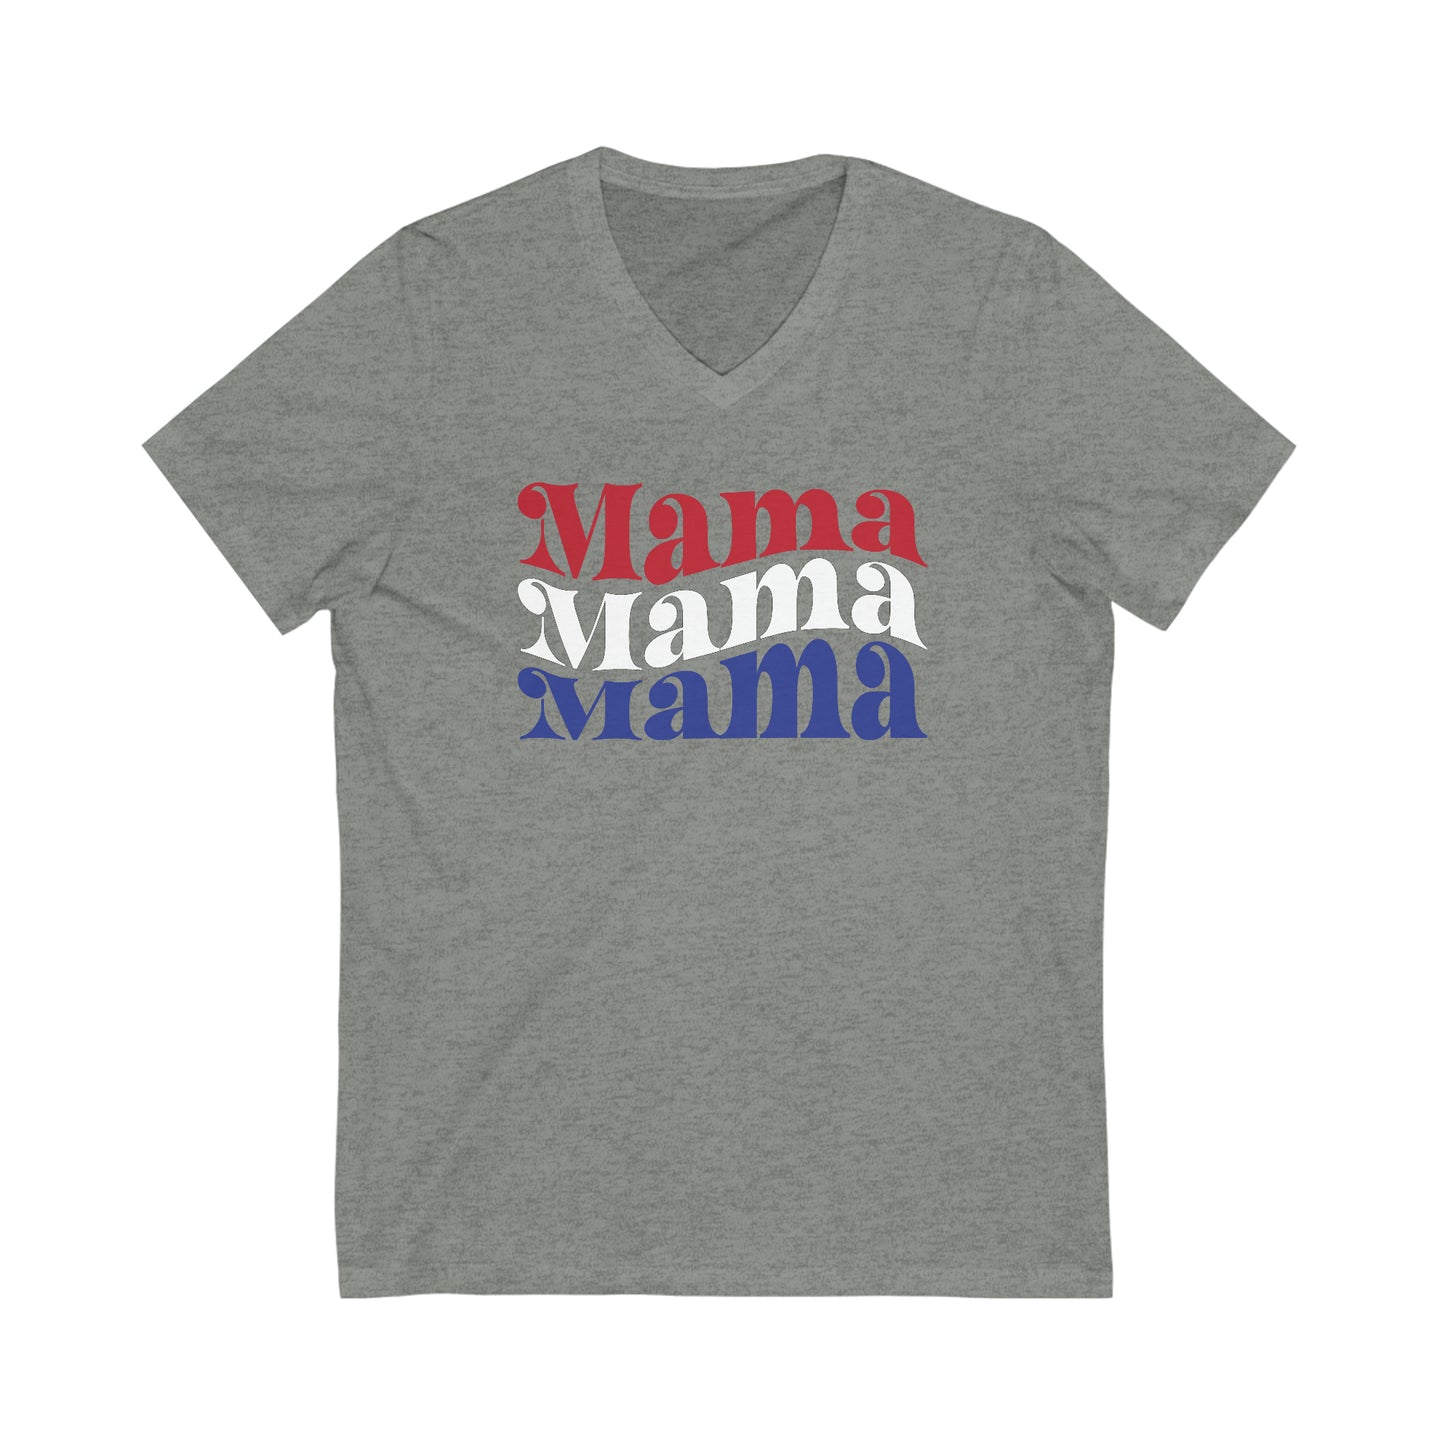 Mama T-Shirt For Mother's Day Gift For Mom TShirt For Conservative T Shirt For Patriotic Mom Shirt For America First Shirt